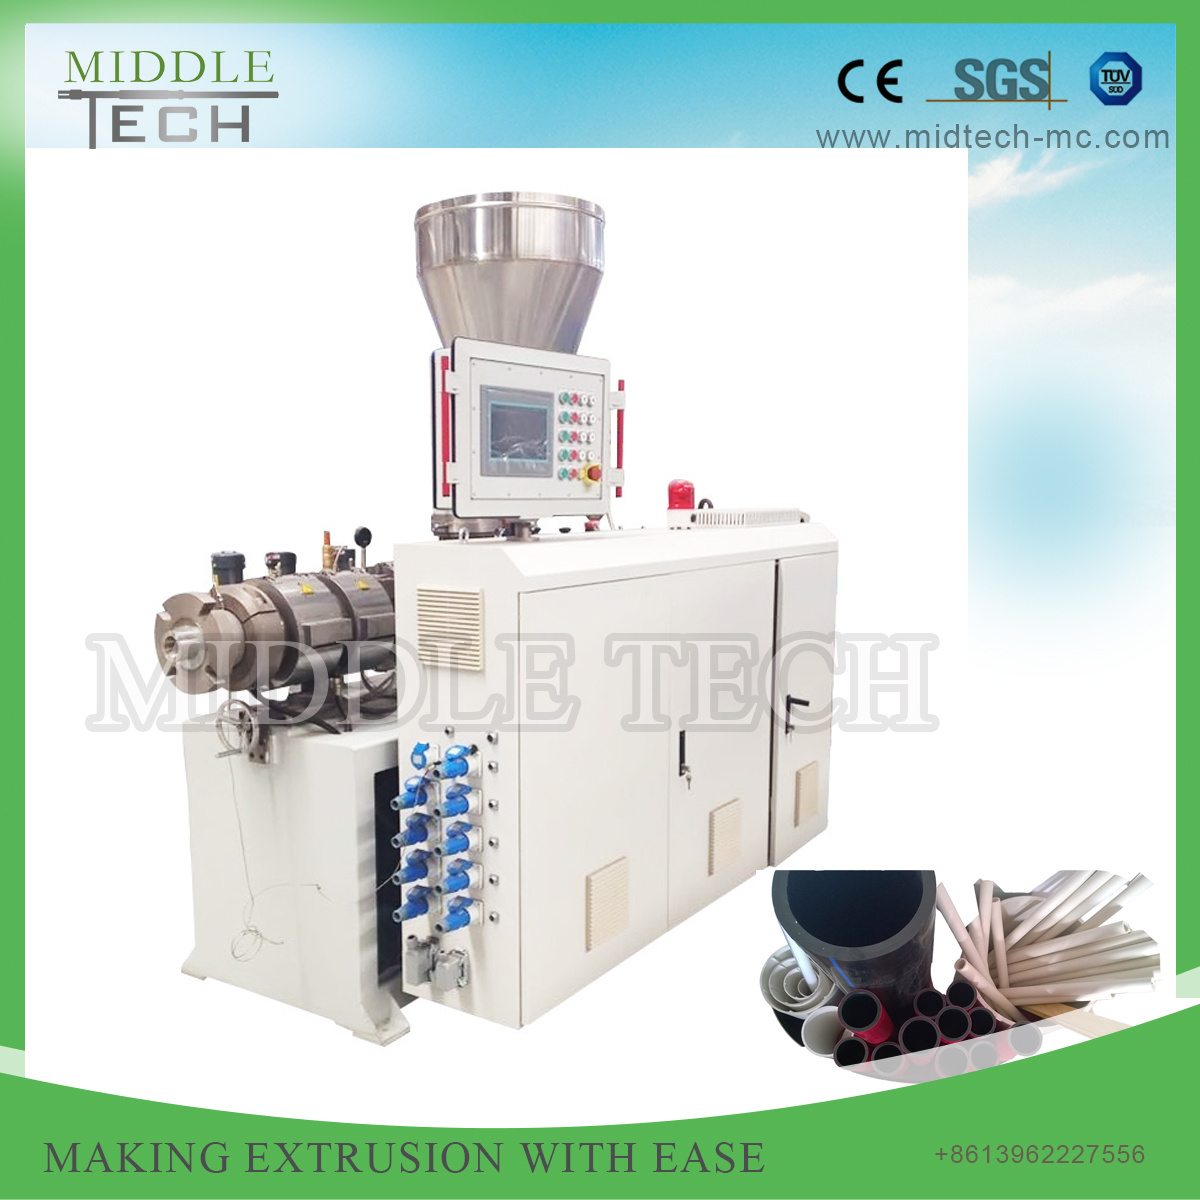 Plastic PVC/UPVC Electricity/Electric/Electrical Conduit Cable/Pipe/Tube/Hose Extrusion/Extruder Making Machine